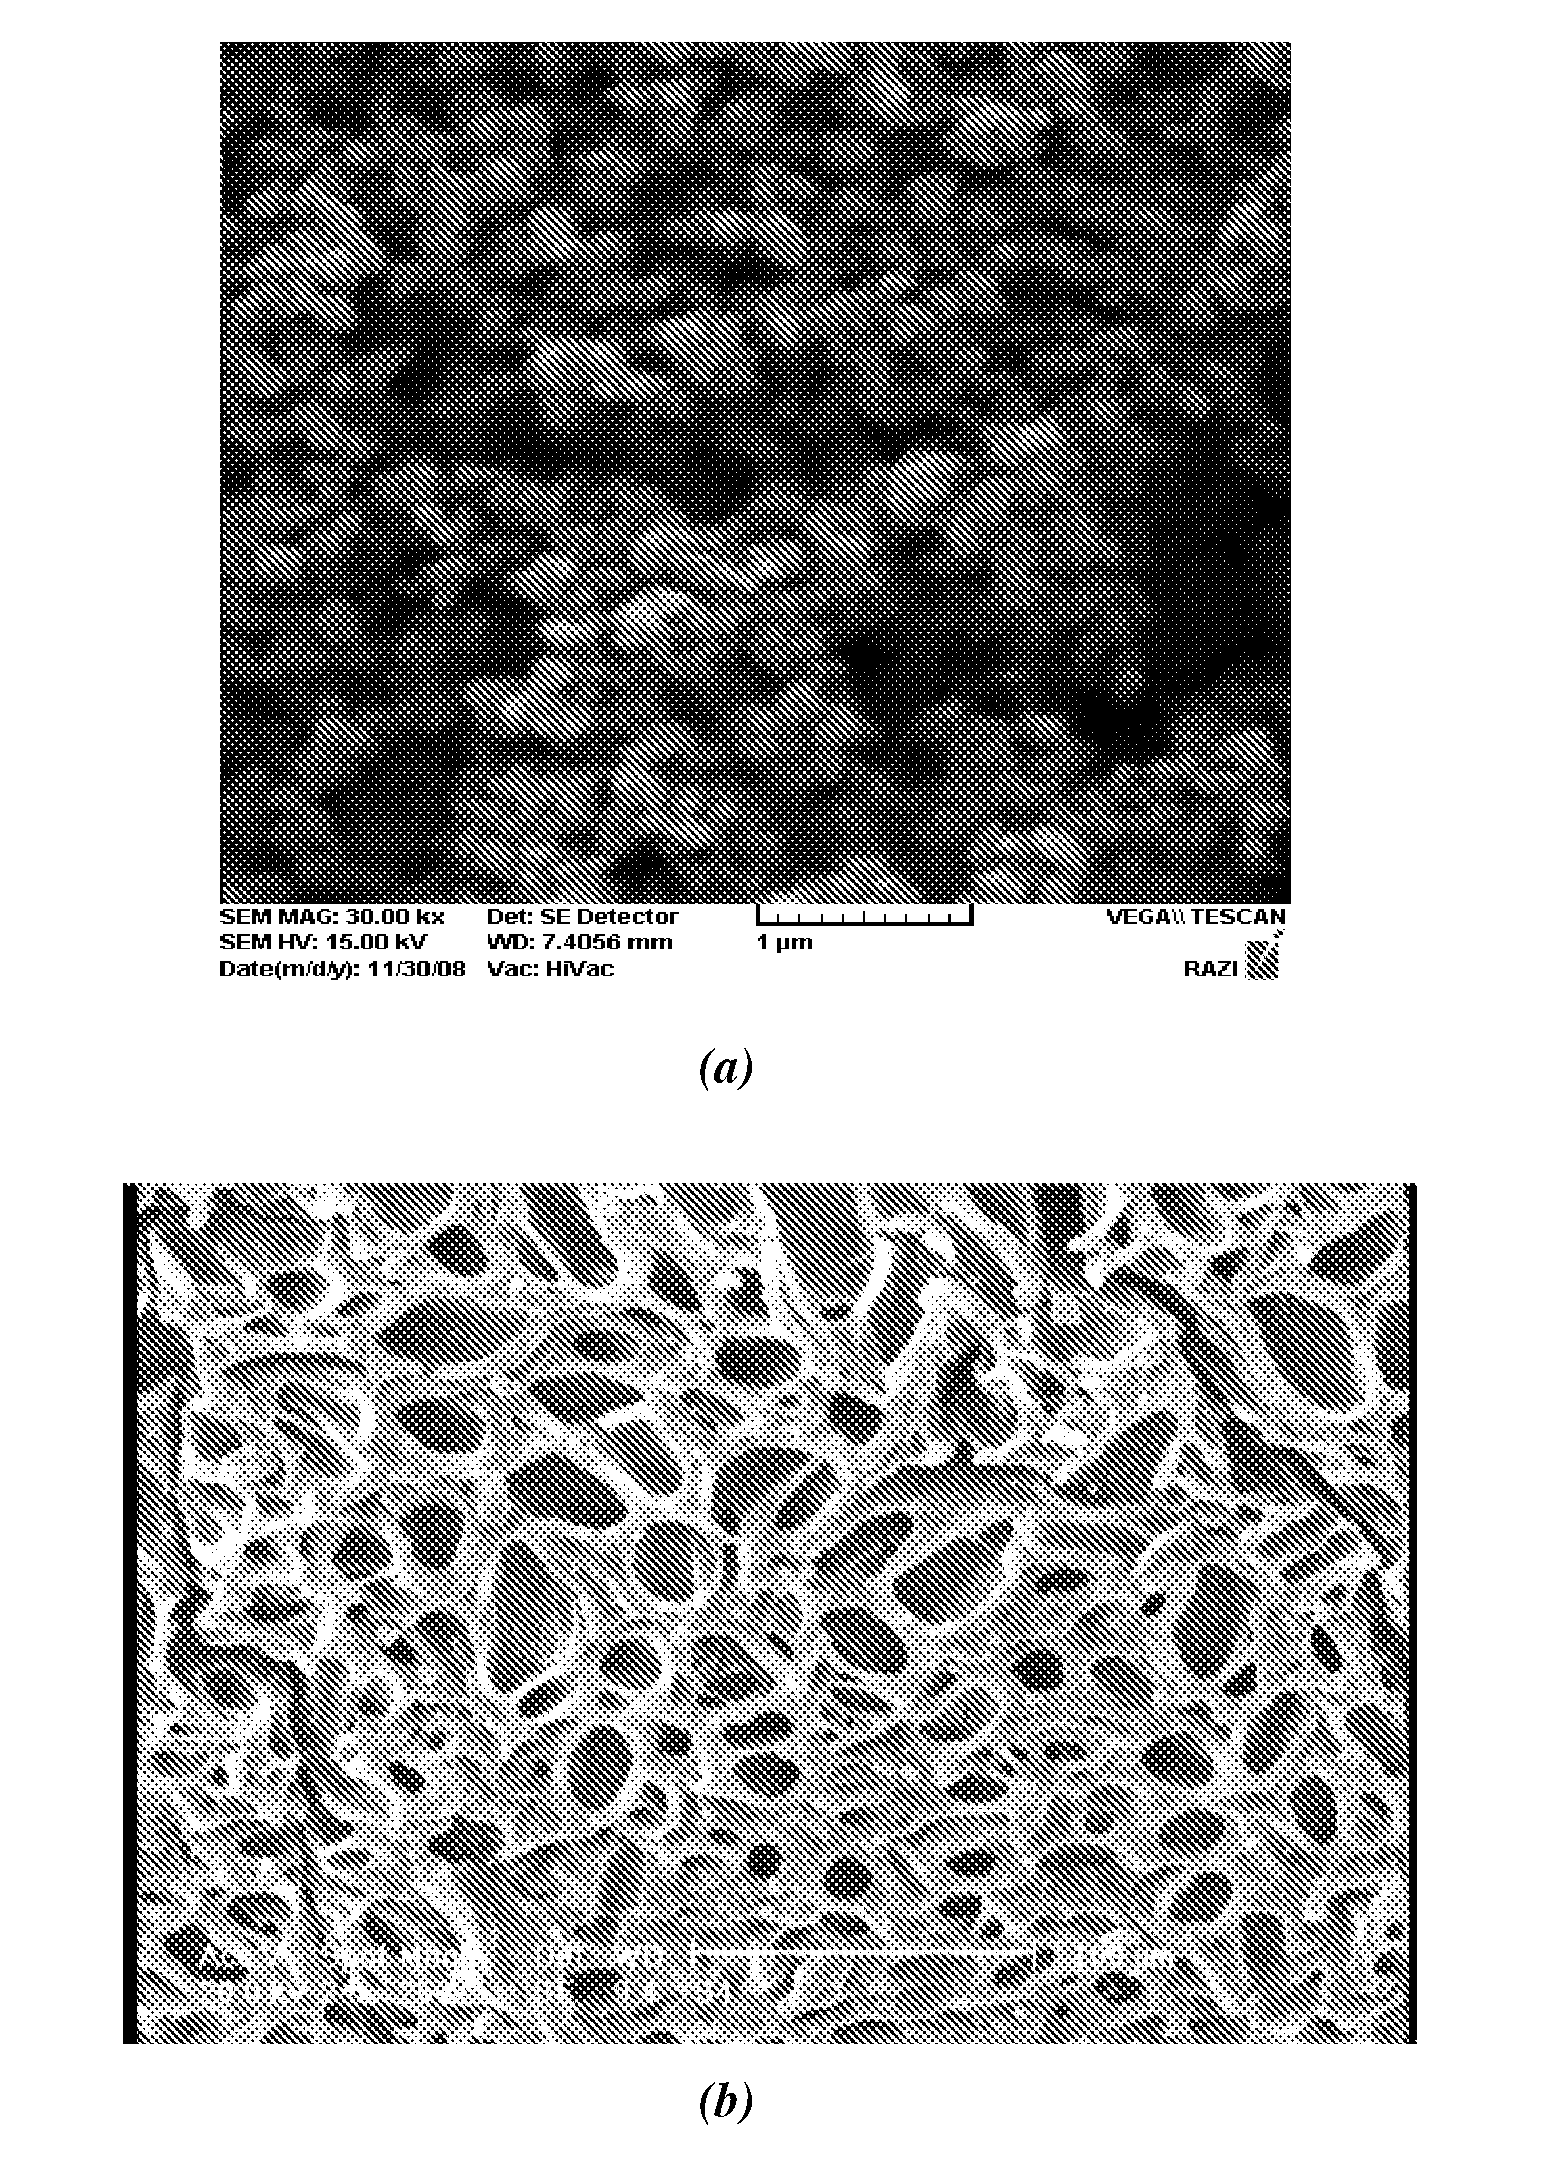 Nano-composite superabsorbent containing fertilizer nutrients used in agriculture